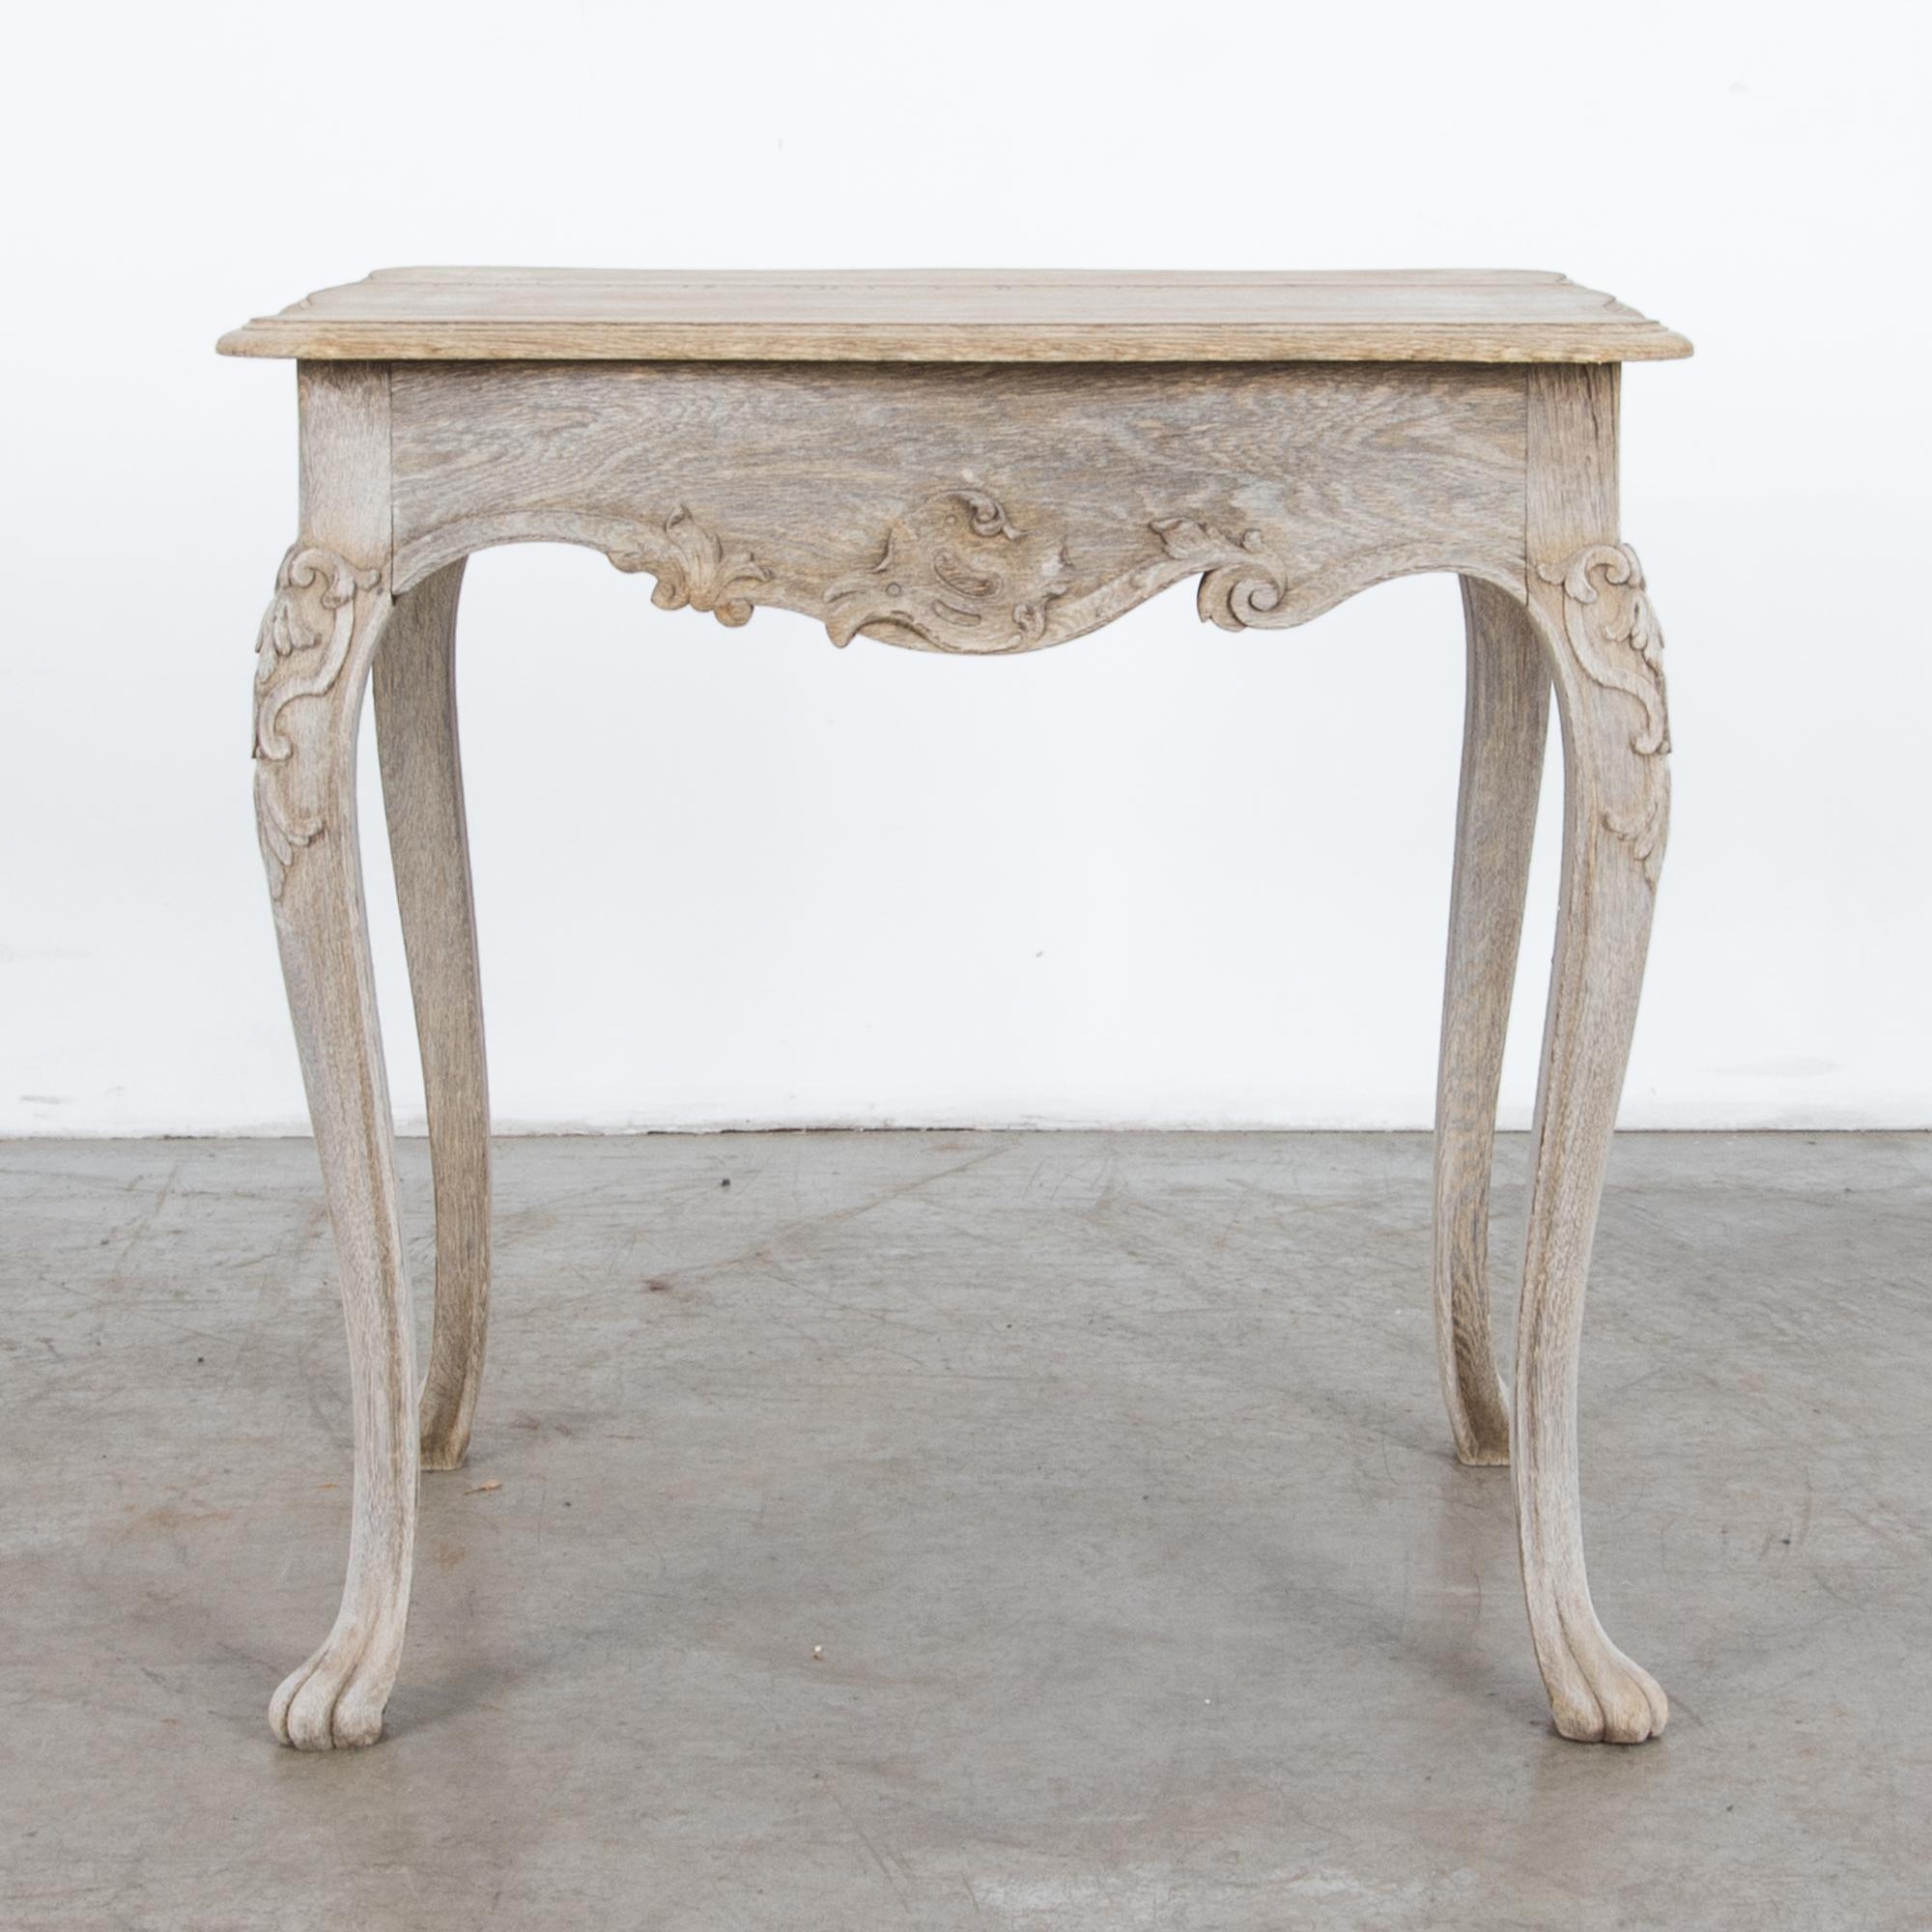 From circa 1880 France, a bleached oak table with distinctive curved legs. A classical shape first recorded in ancient Greece and China, regaining popularity in France during the Rococo period. Stylish and practical with versatile shape, charming